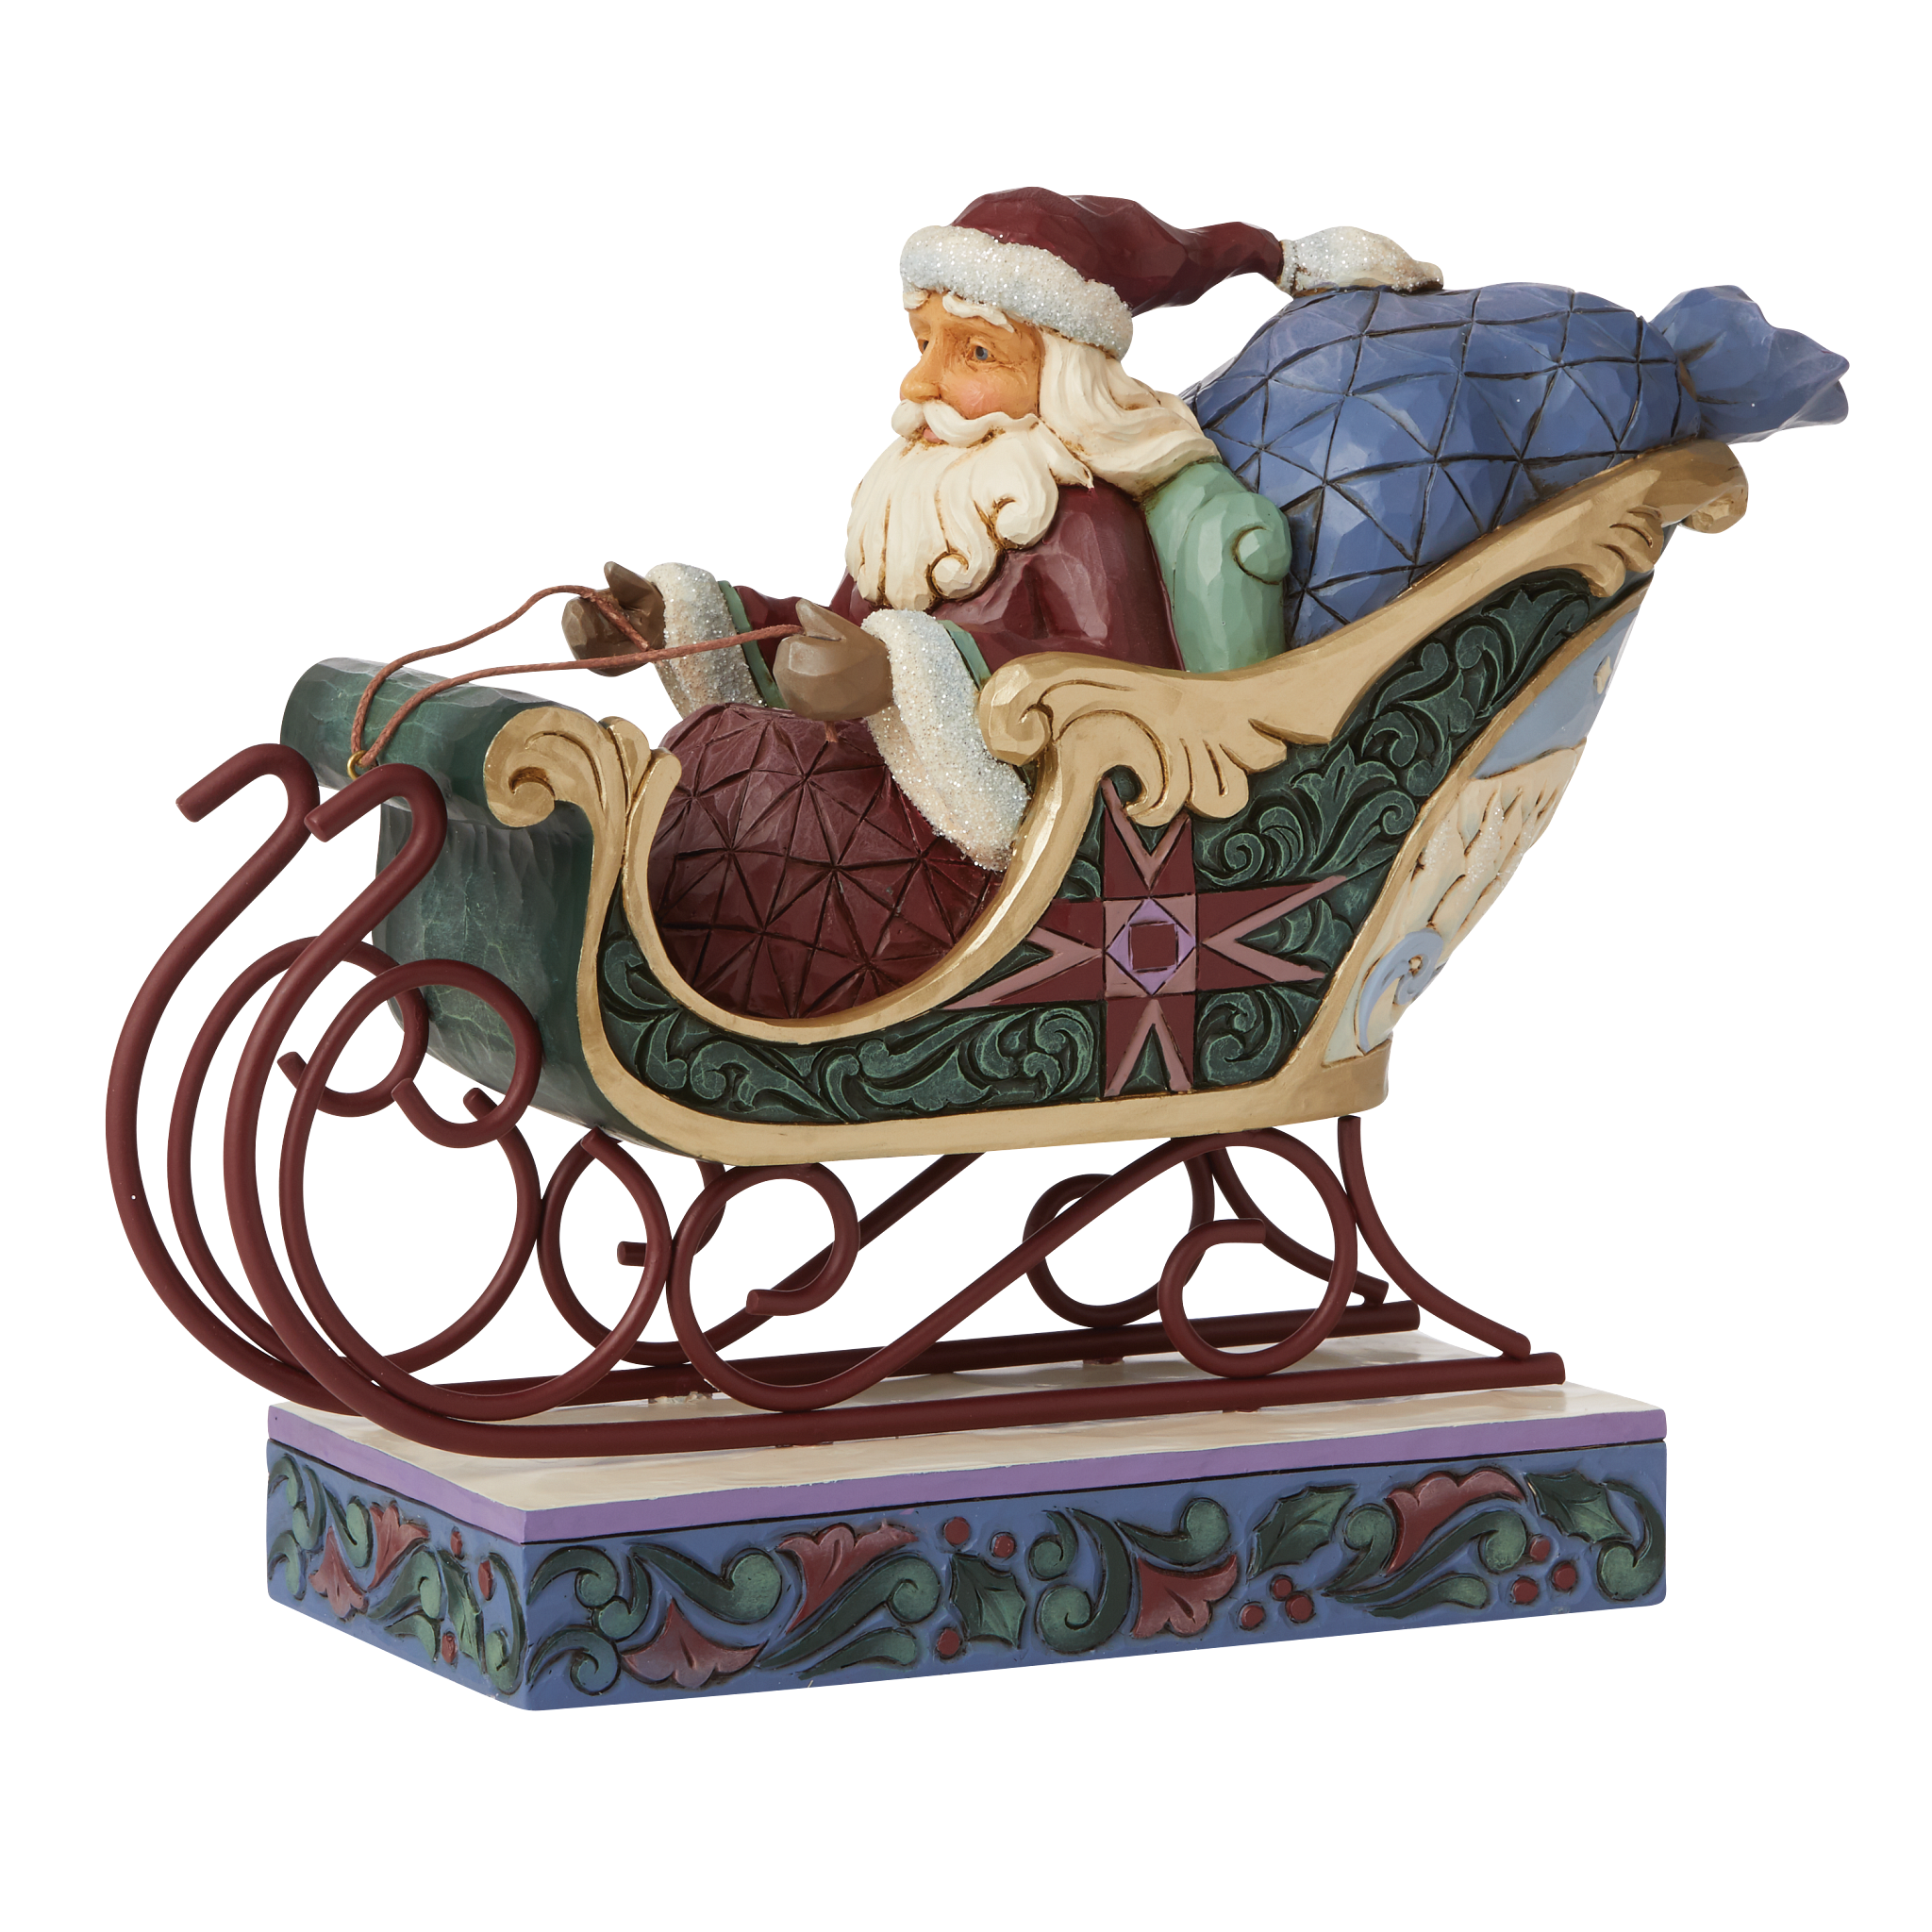 JS Santa in Sleigh Limited Edition Figurine